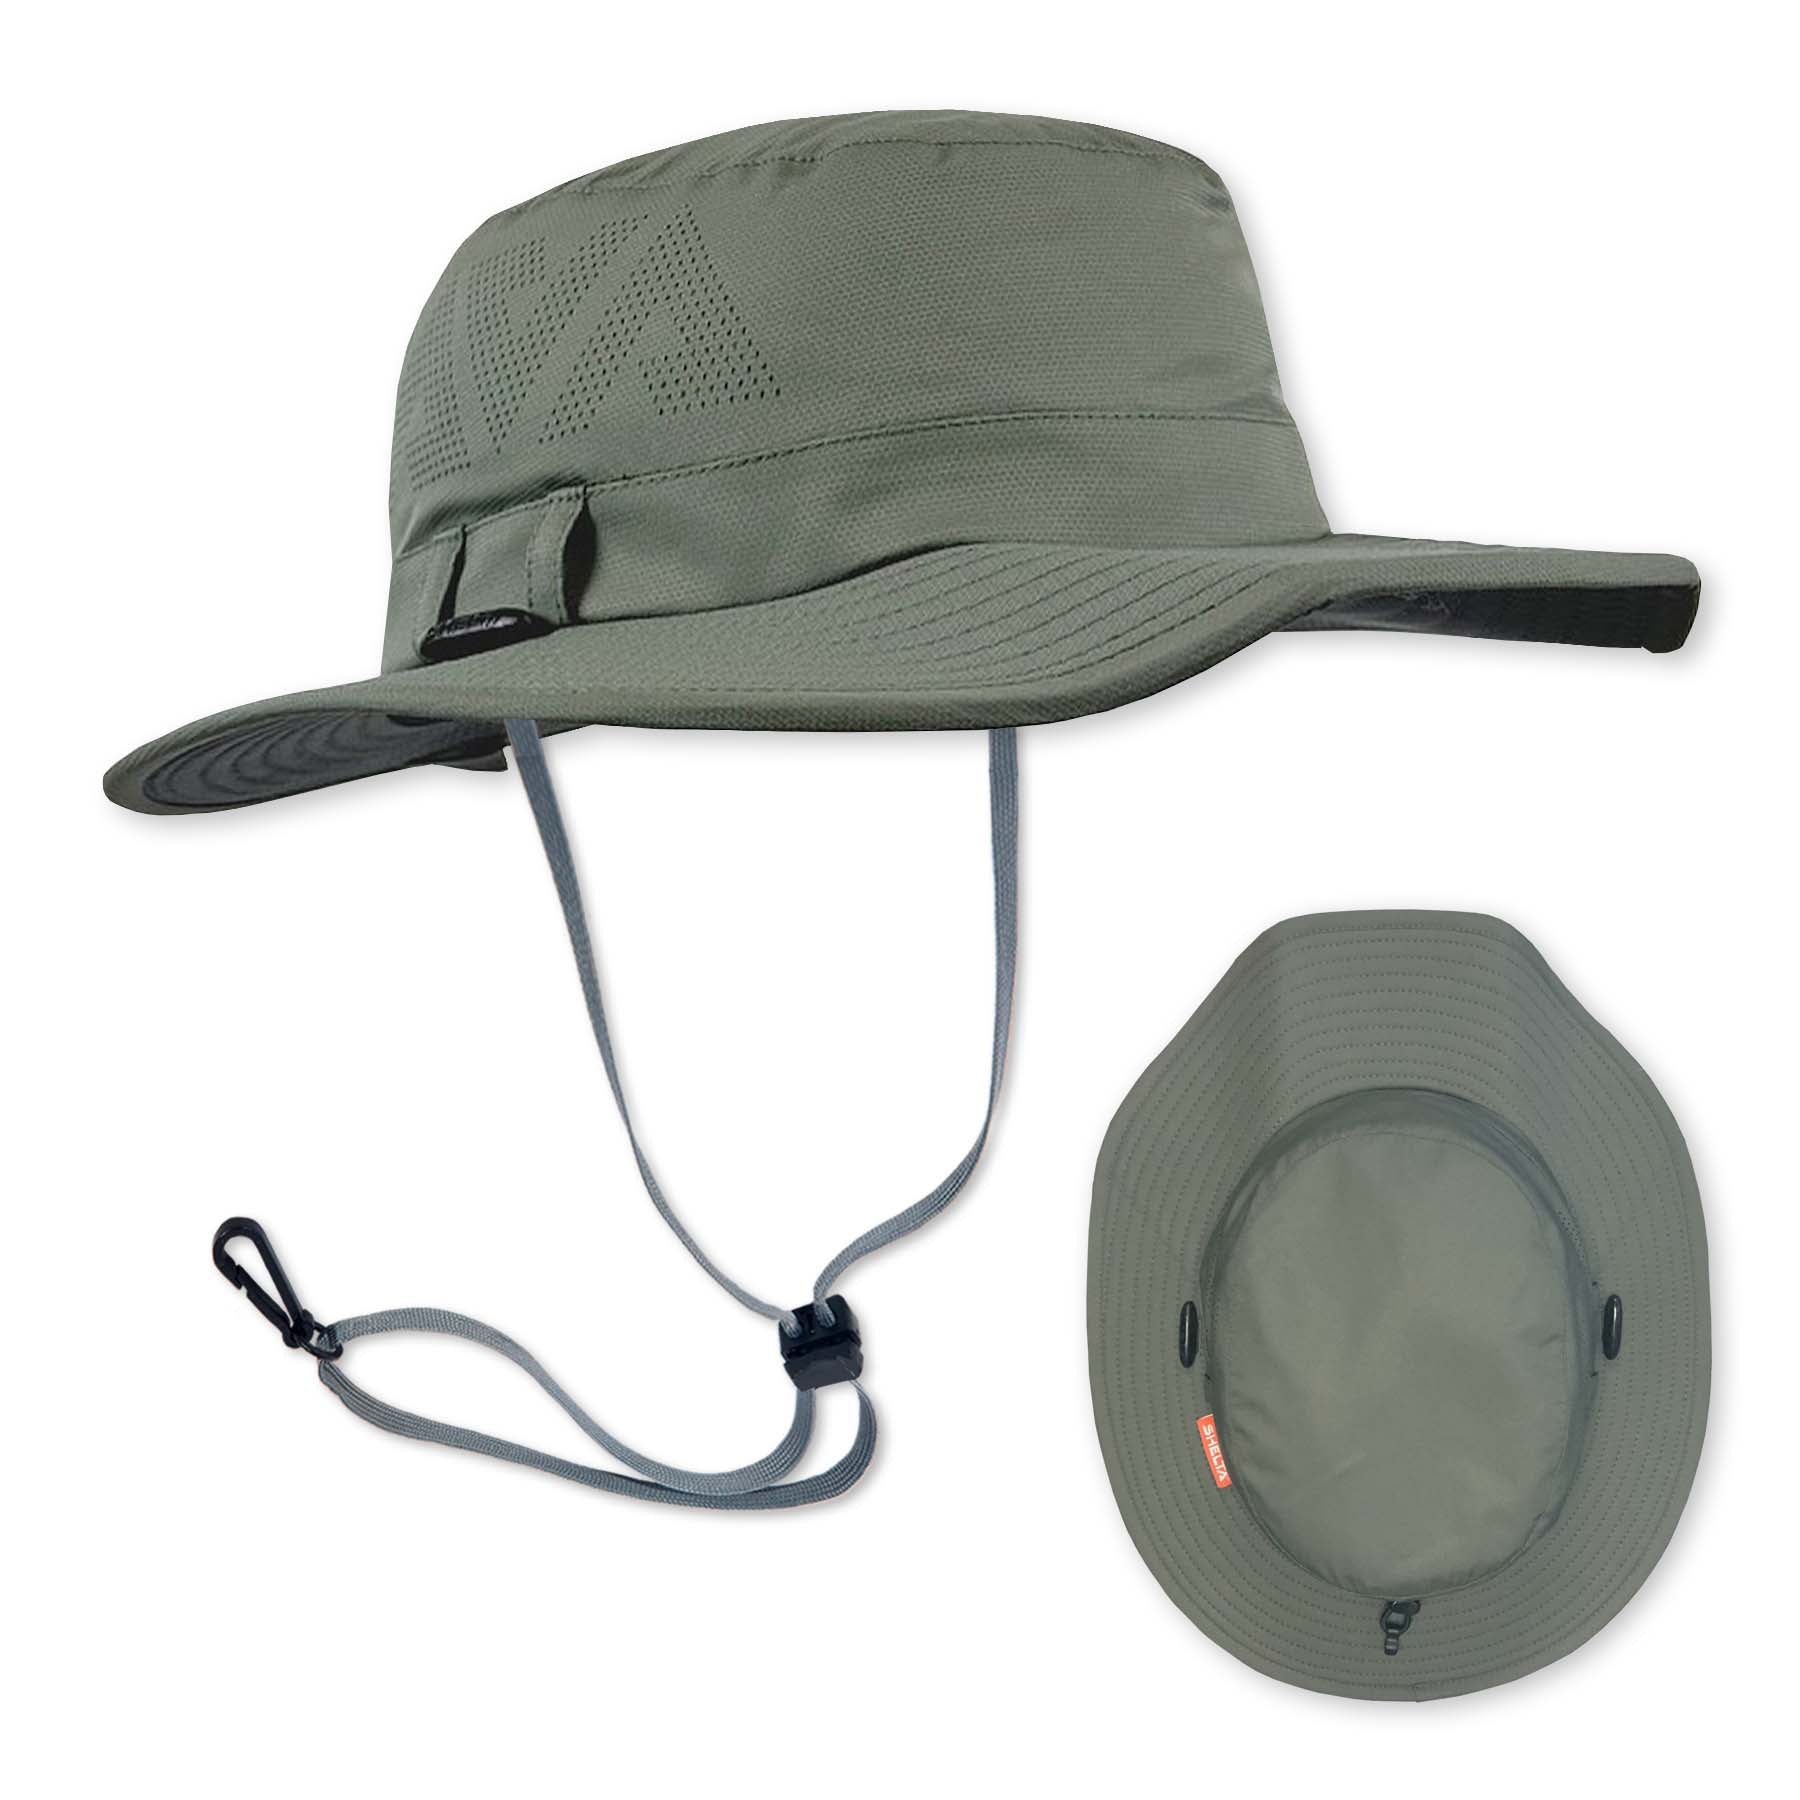 The Land Hawk Performance Sun Protection Hat L/XL / Dirty Olive